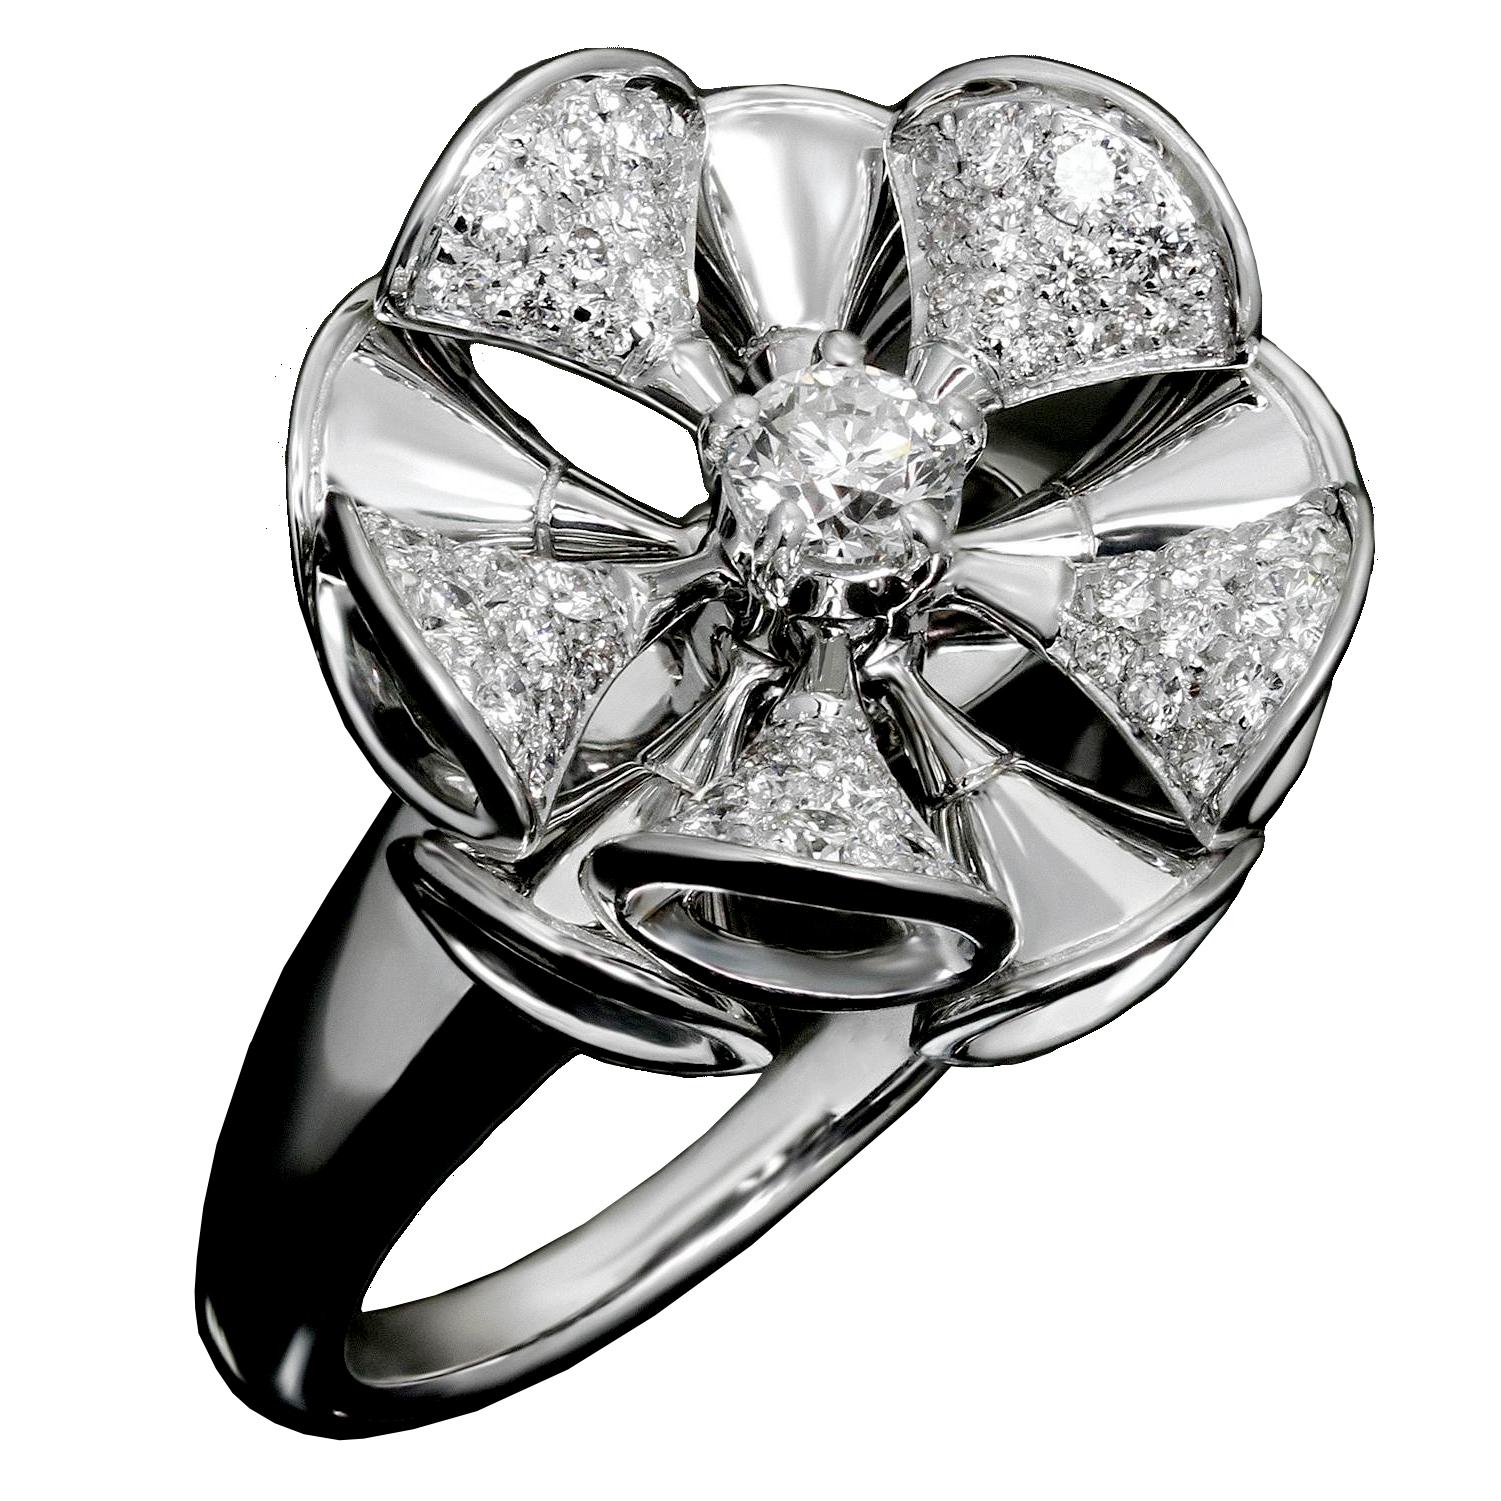 A magnificent Bvlgari diamond cocktail ring from the Divas Dream collection inspired by feminine elegance. Designed after the Baths of Caracalla's marble and the curves of fan shaped motifs in 18k white gold. The ring has a total weight of 1.05ct,